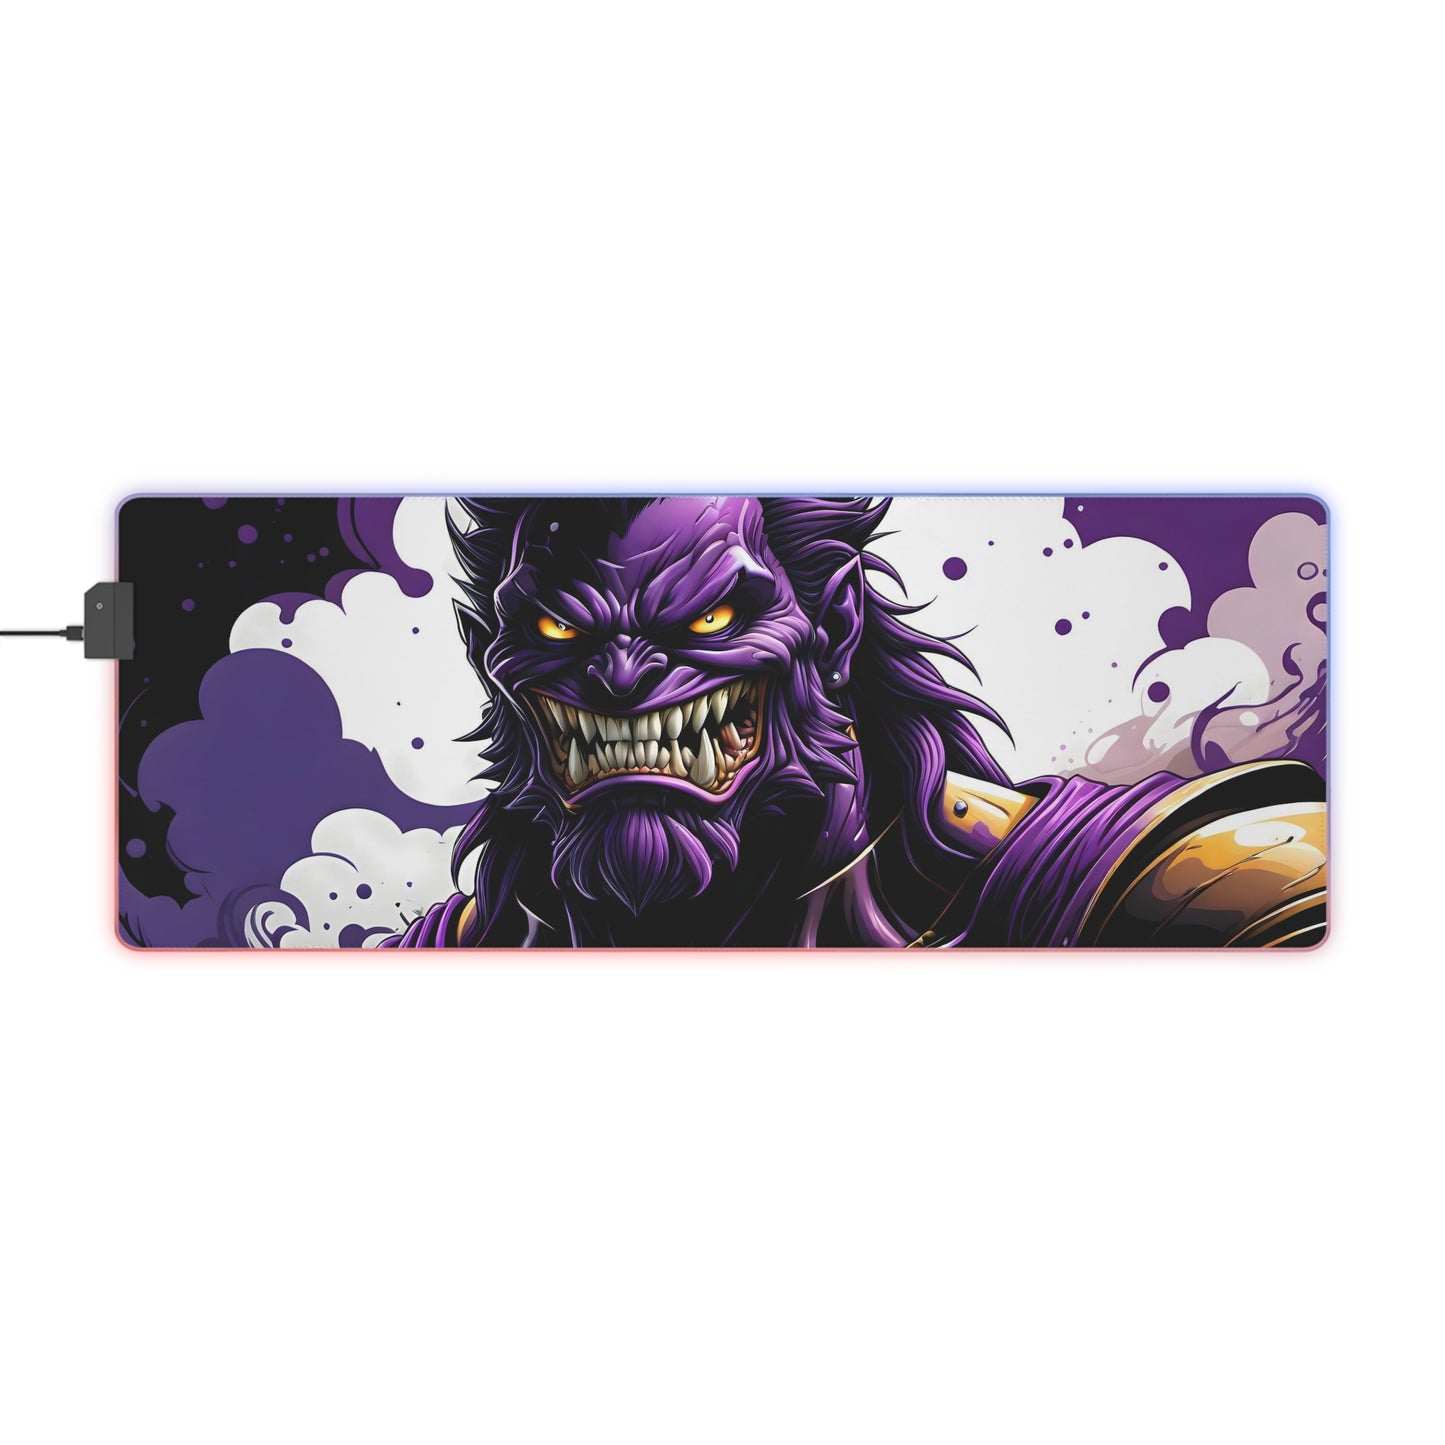 Mutant Tyrant of War Gaming Mouse Pad